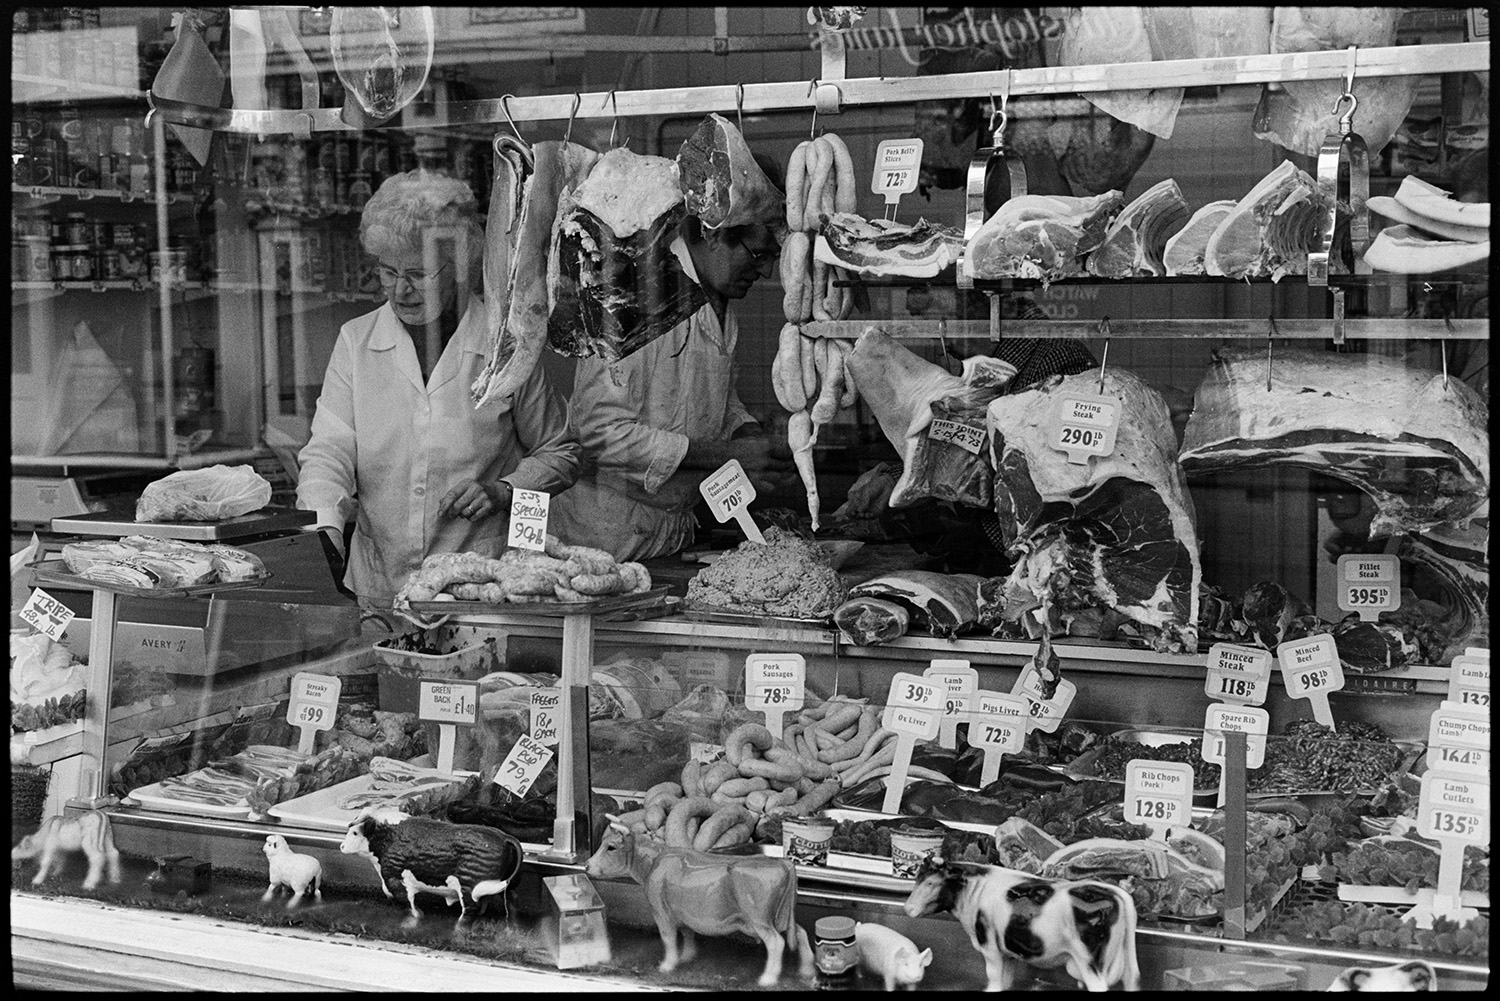 Front of butcher's shop with butcher weighing meat.
[the shop front window of a butcher's shop in Butcher's Row, Barnstaple, with a butcher weighing out meat inside. The shop window is full of meat on display, including sausages, chops, minced beef and steaks. Meat is also shown hanging from hooks with model farm animals on display in the window.]